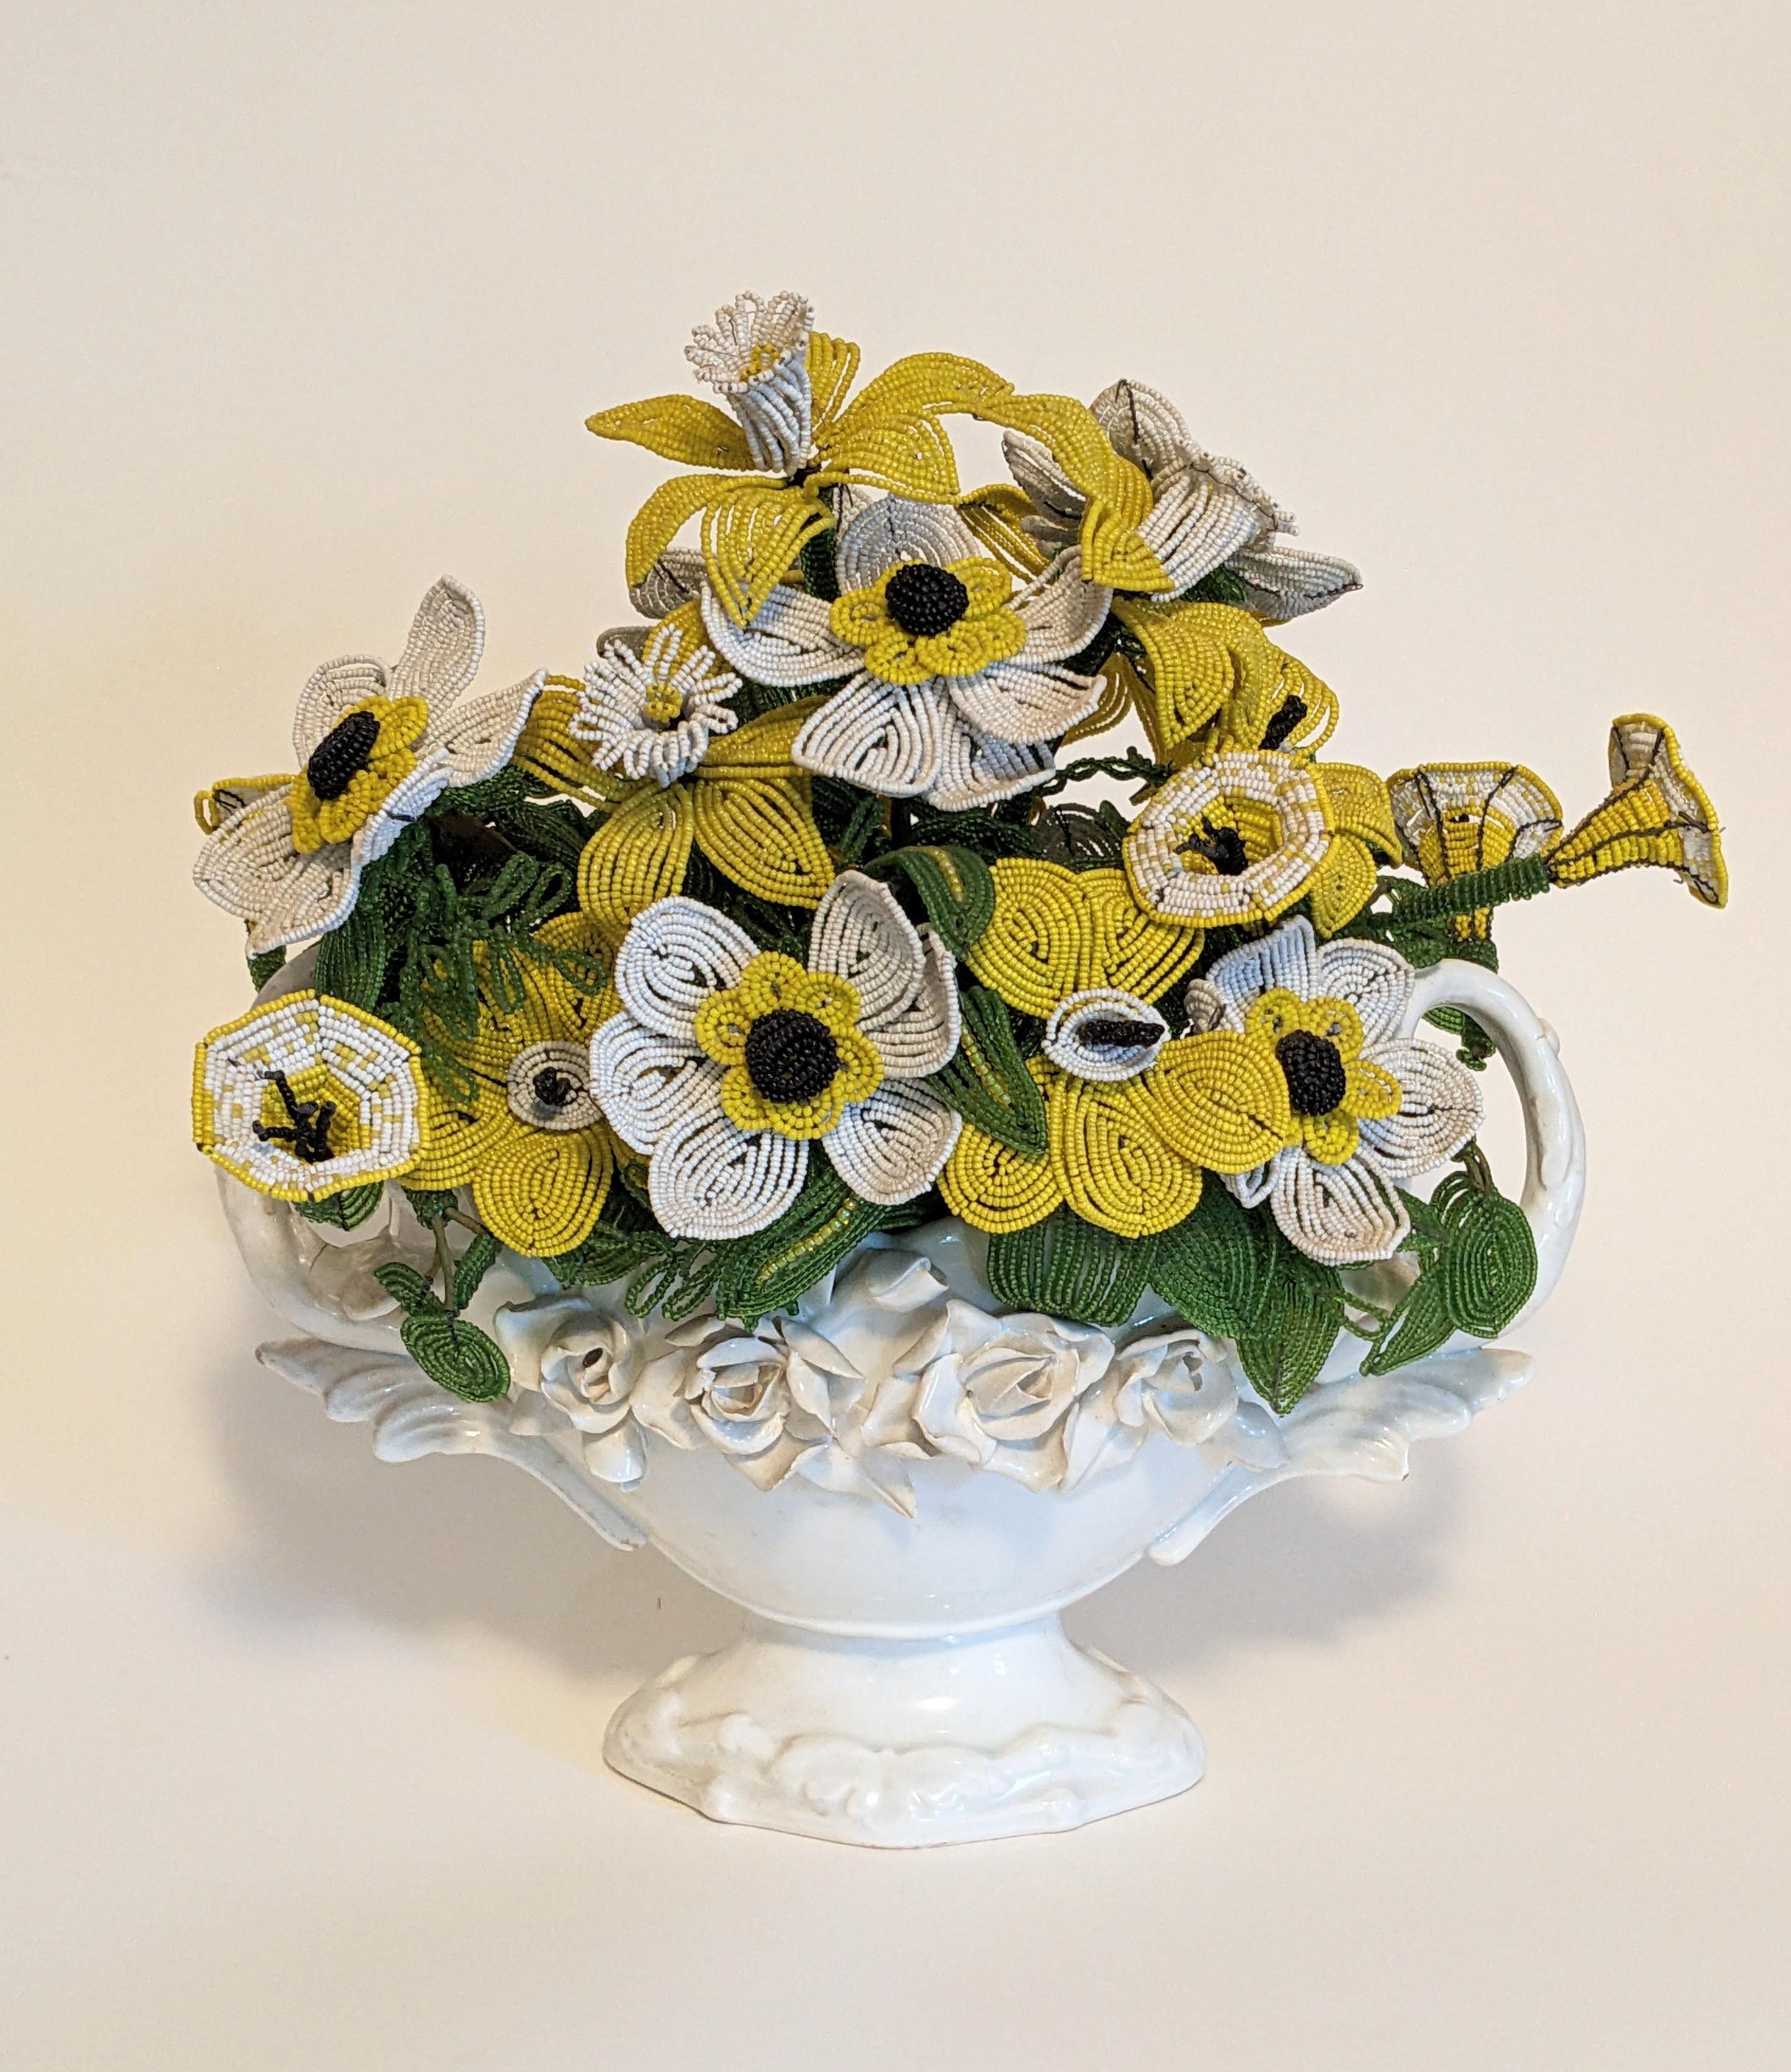 Beaded Flower Arrangement from the 1960's. The rage for beaded flowers started in the 1960's and ornate labor intensive, professionally made pots were de rigeur in many households throughout the country. 
Pot of hand made Daffodils, Poppies and